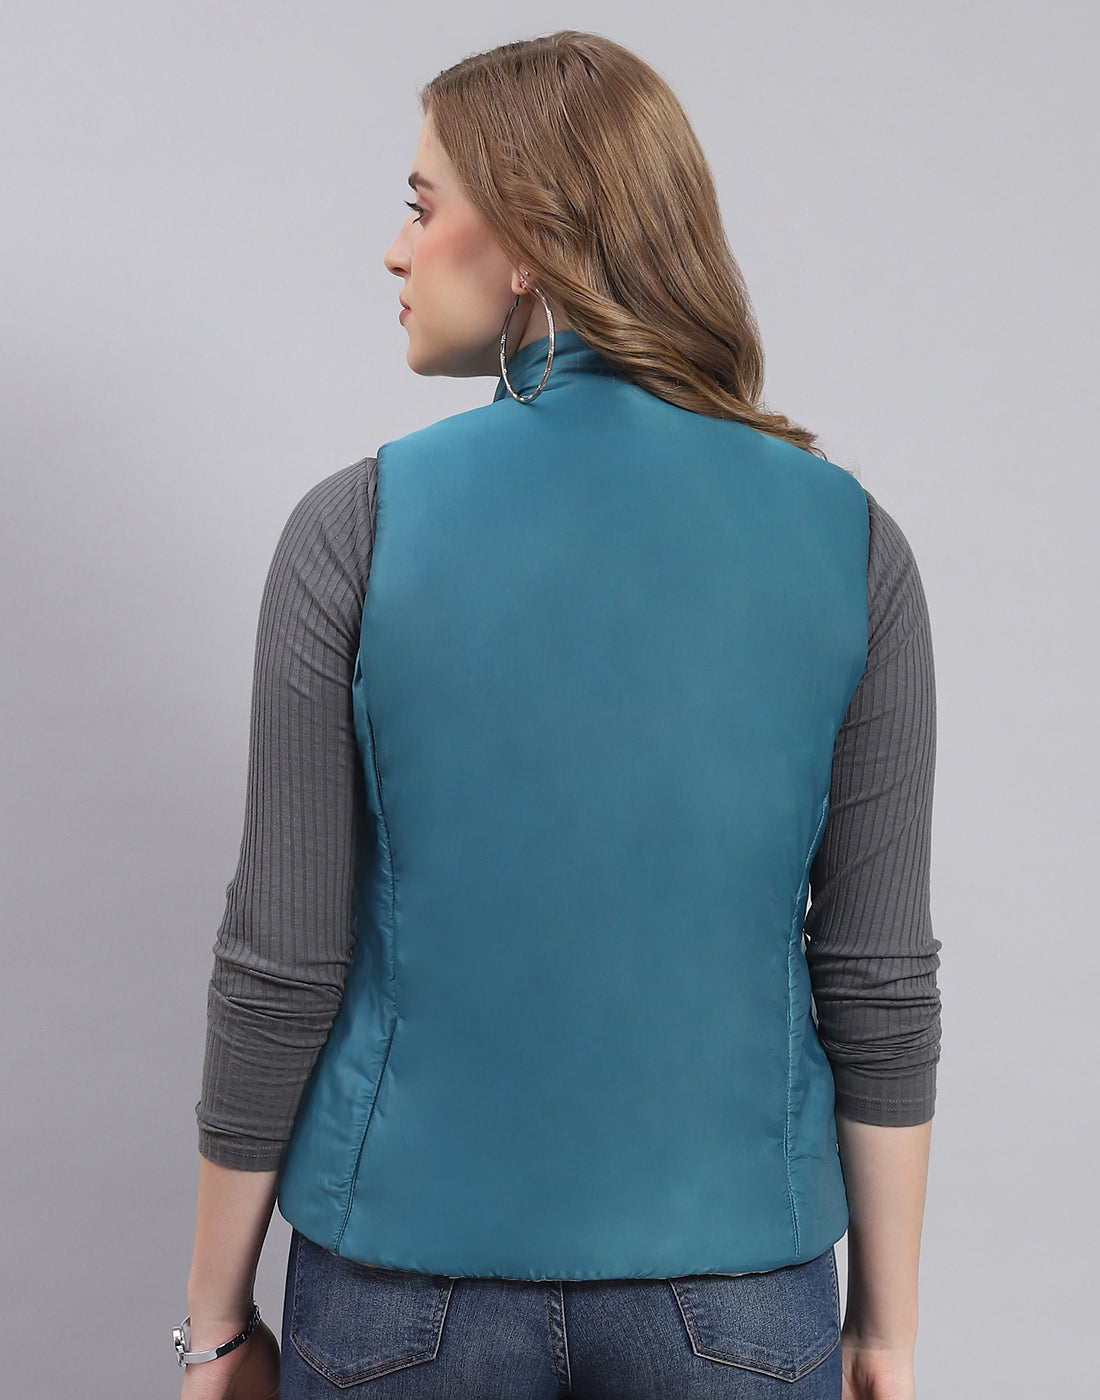 Women Teal Blue Solid Stand Collar Sleeveless Jacket